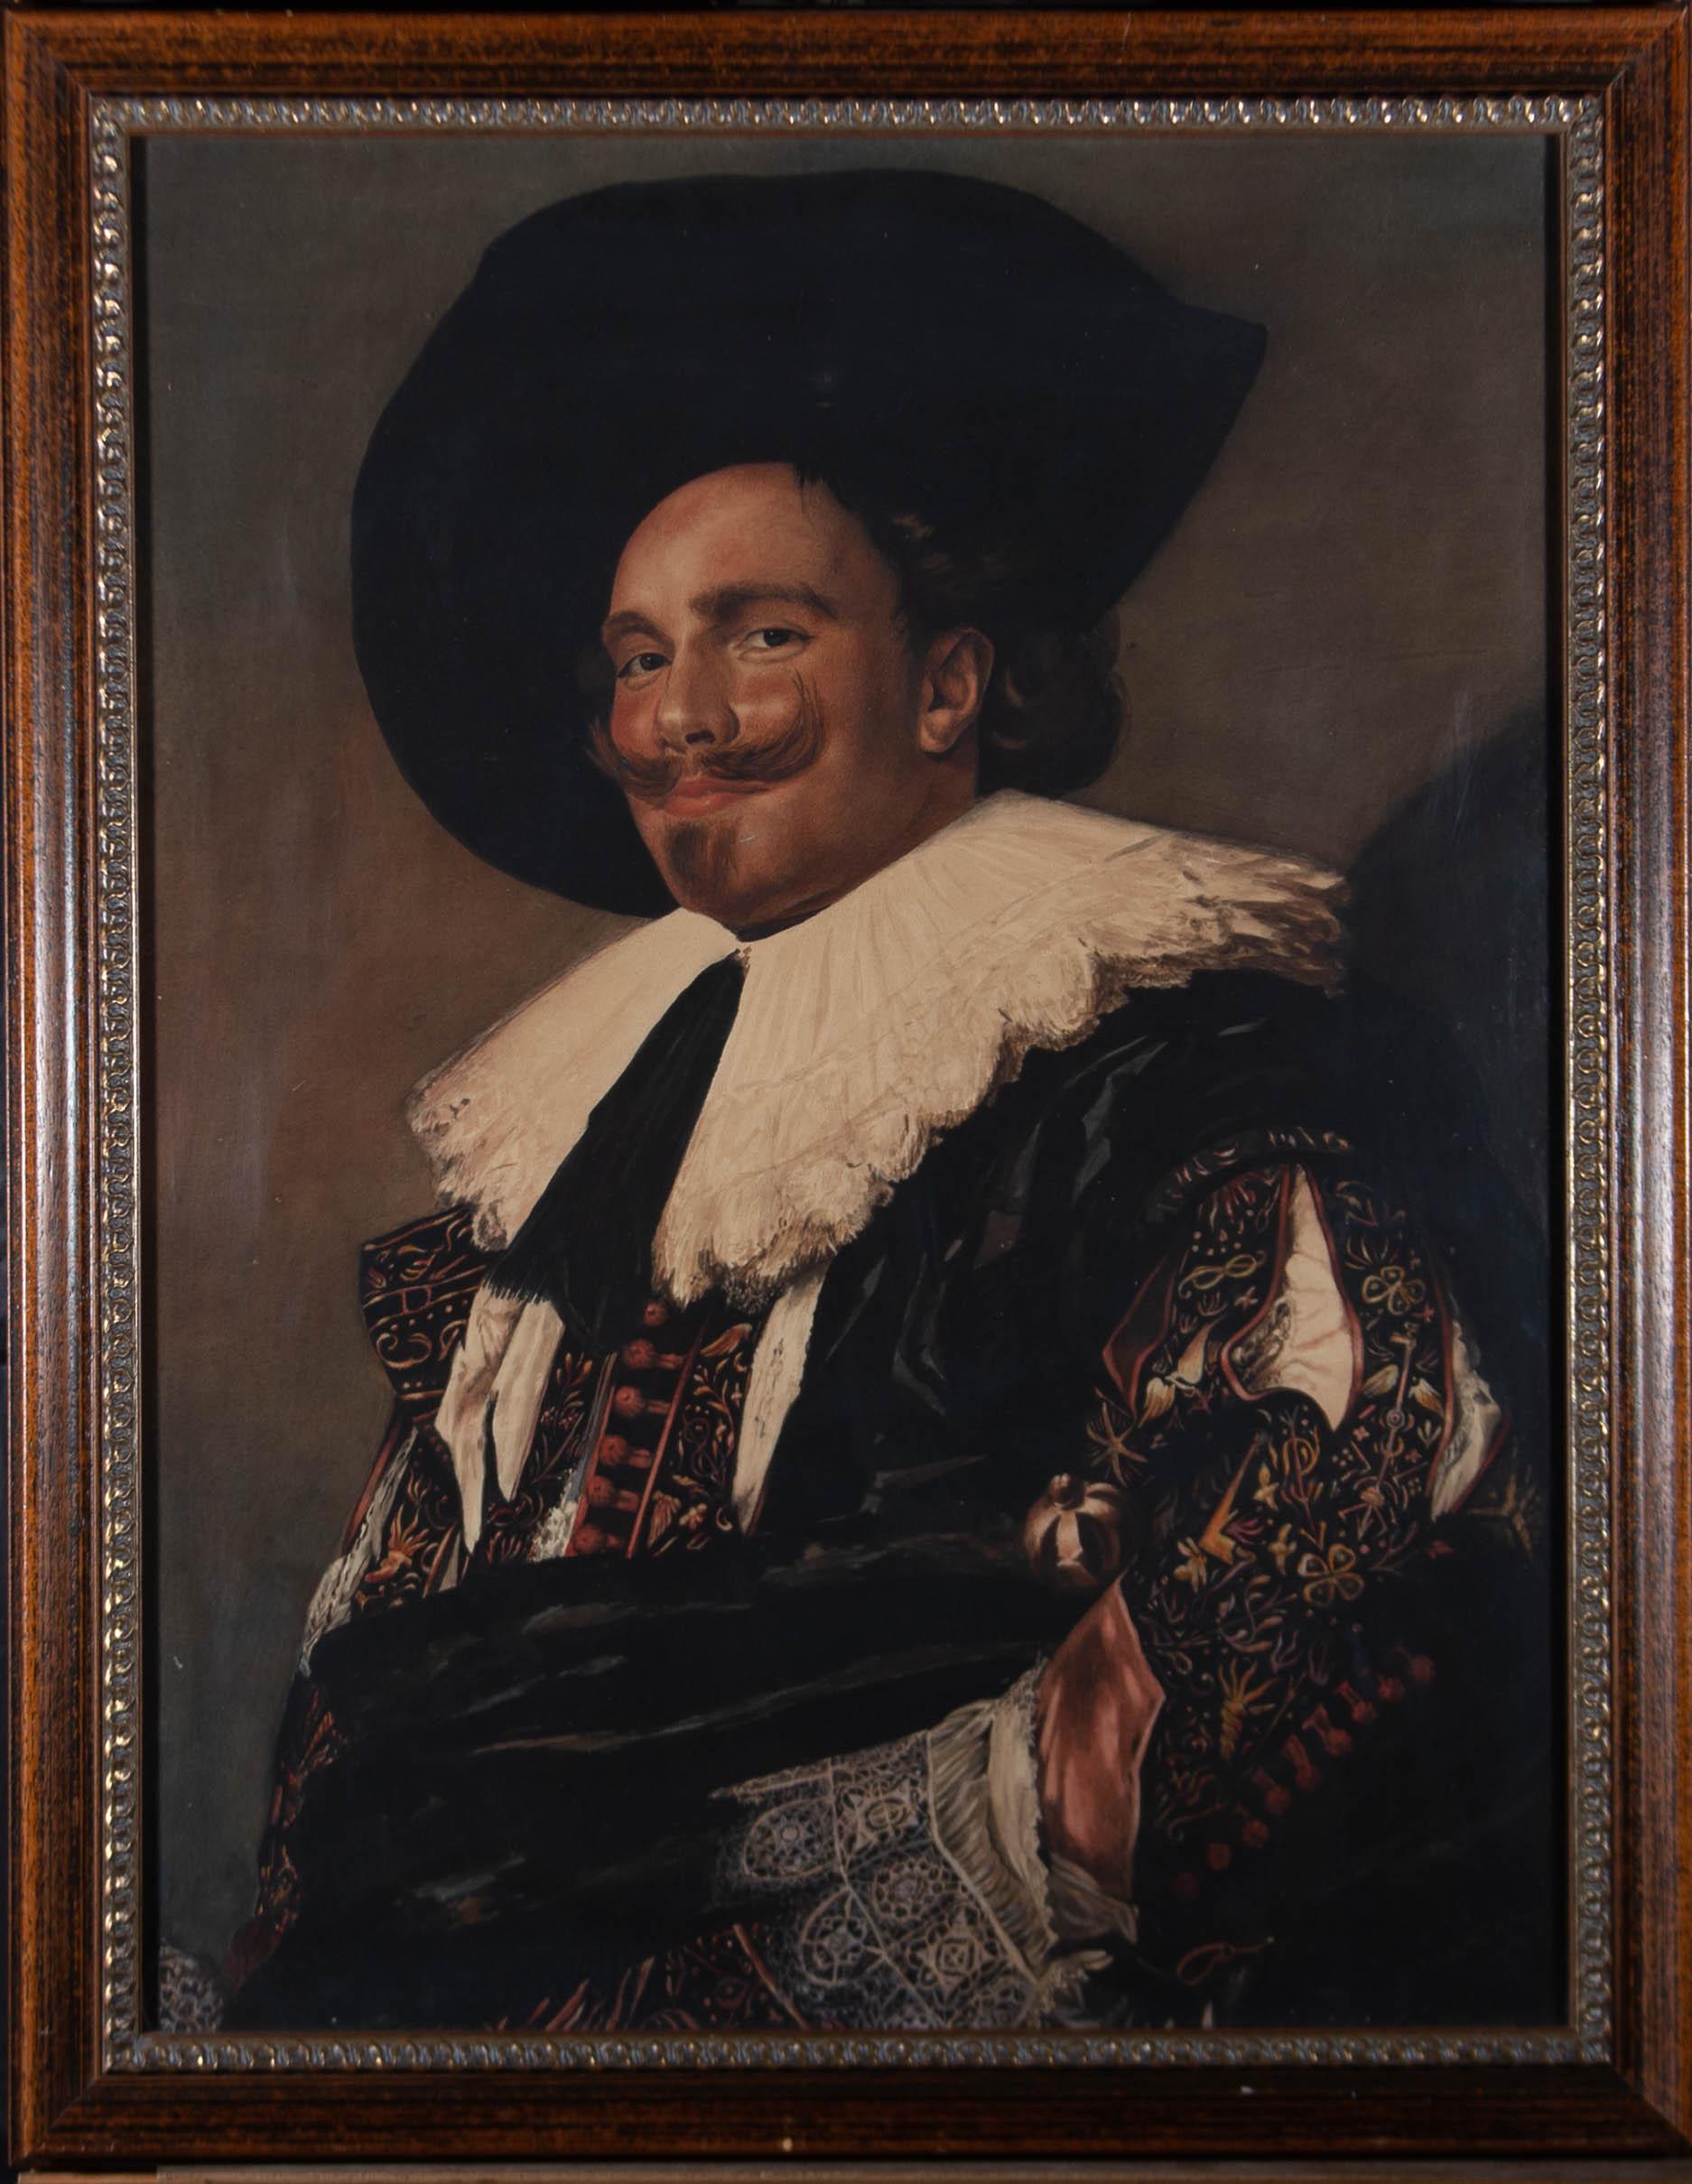 A truly masterful copy of Fran Hals' famous portrait "The Laughing Cavalier." This watercolour rendering of the infamous portrait is exquisitely painted with intense attention to detail. The artist has managed to capture incredible depth and